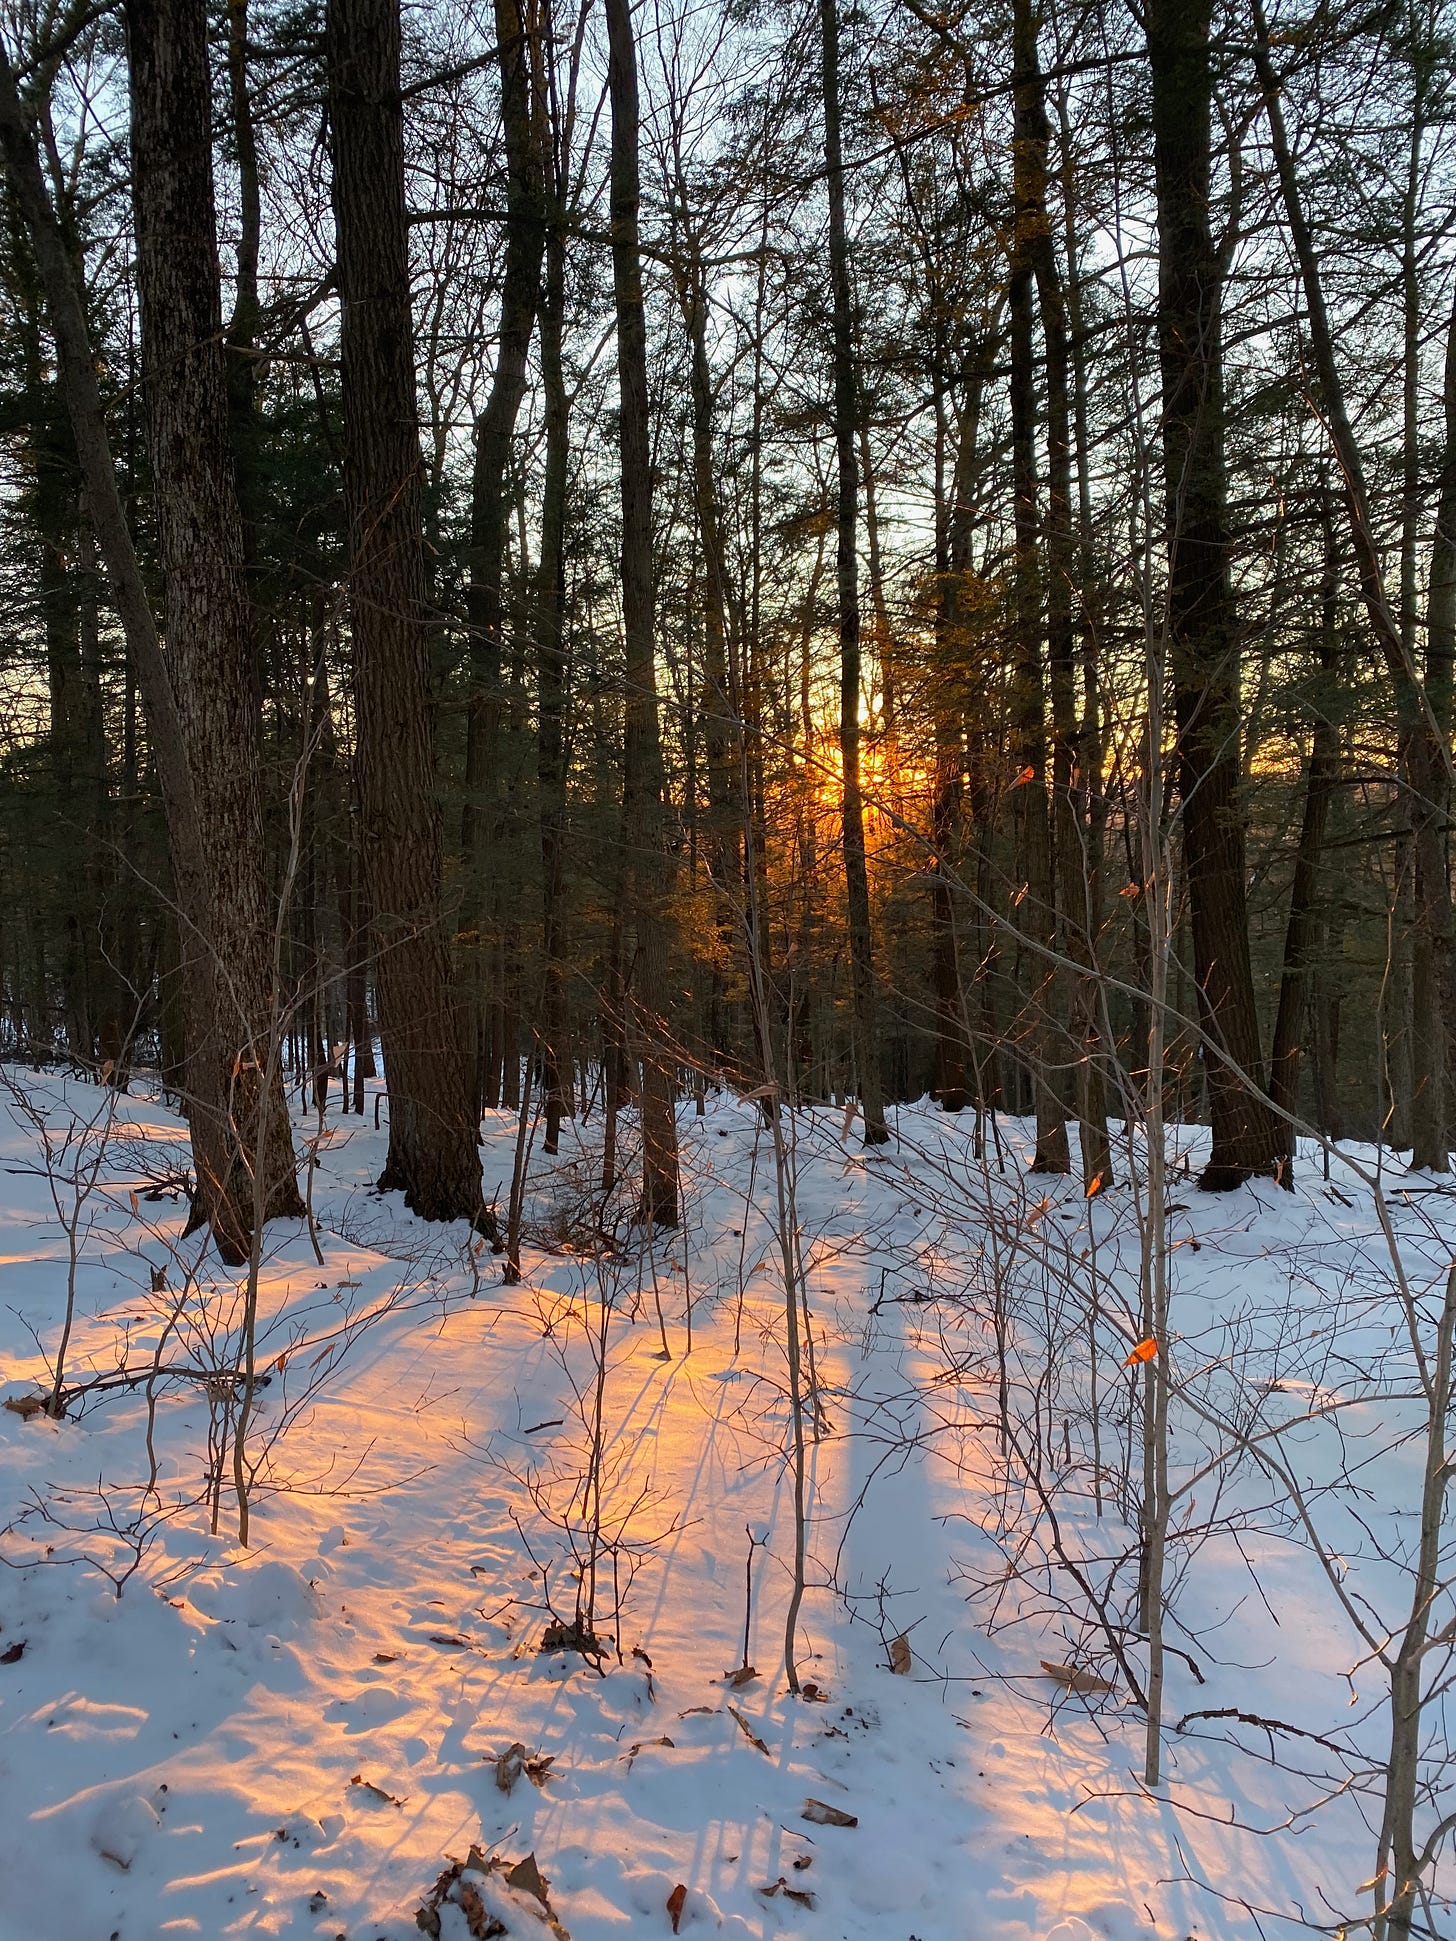 The woods at sunset. The sun is casting long golden shadows on the snowy forest floor.